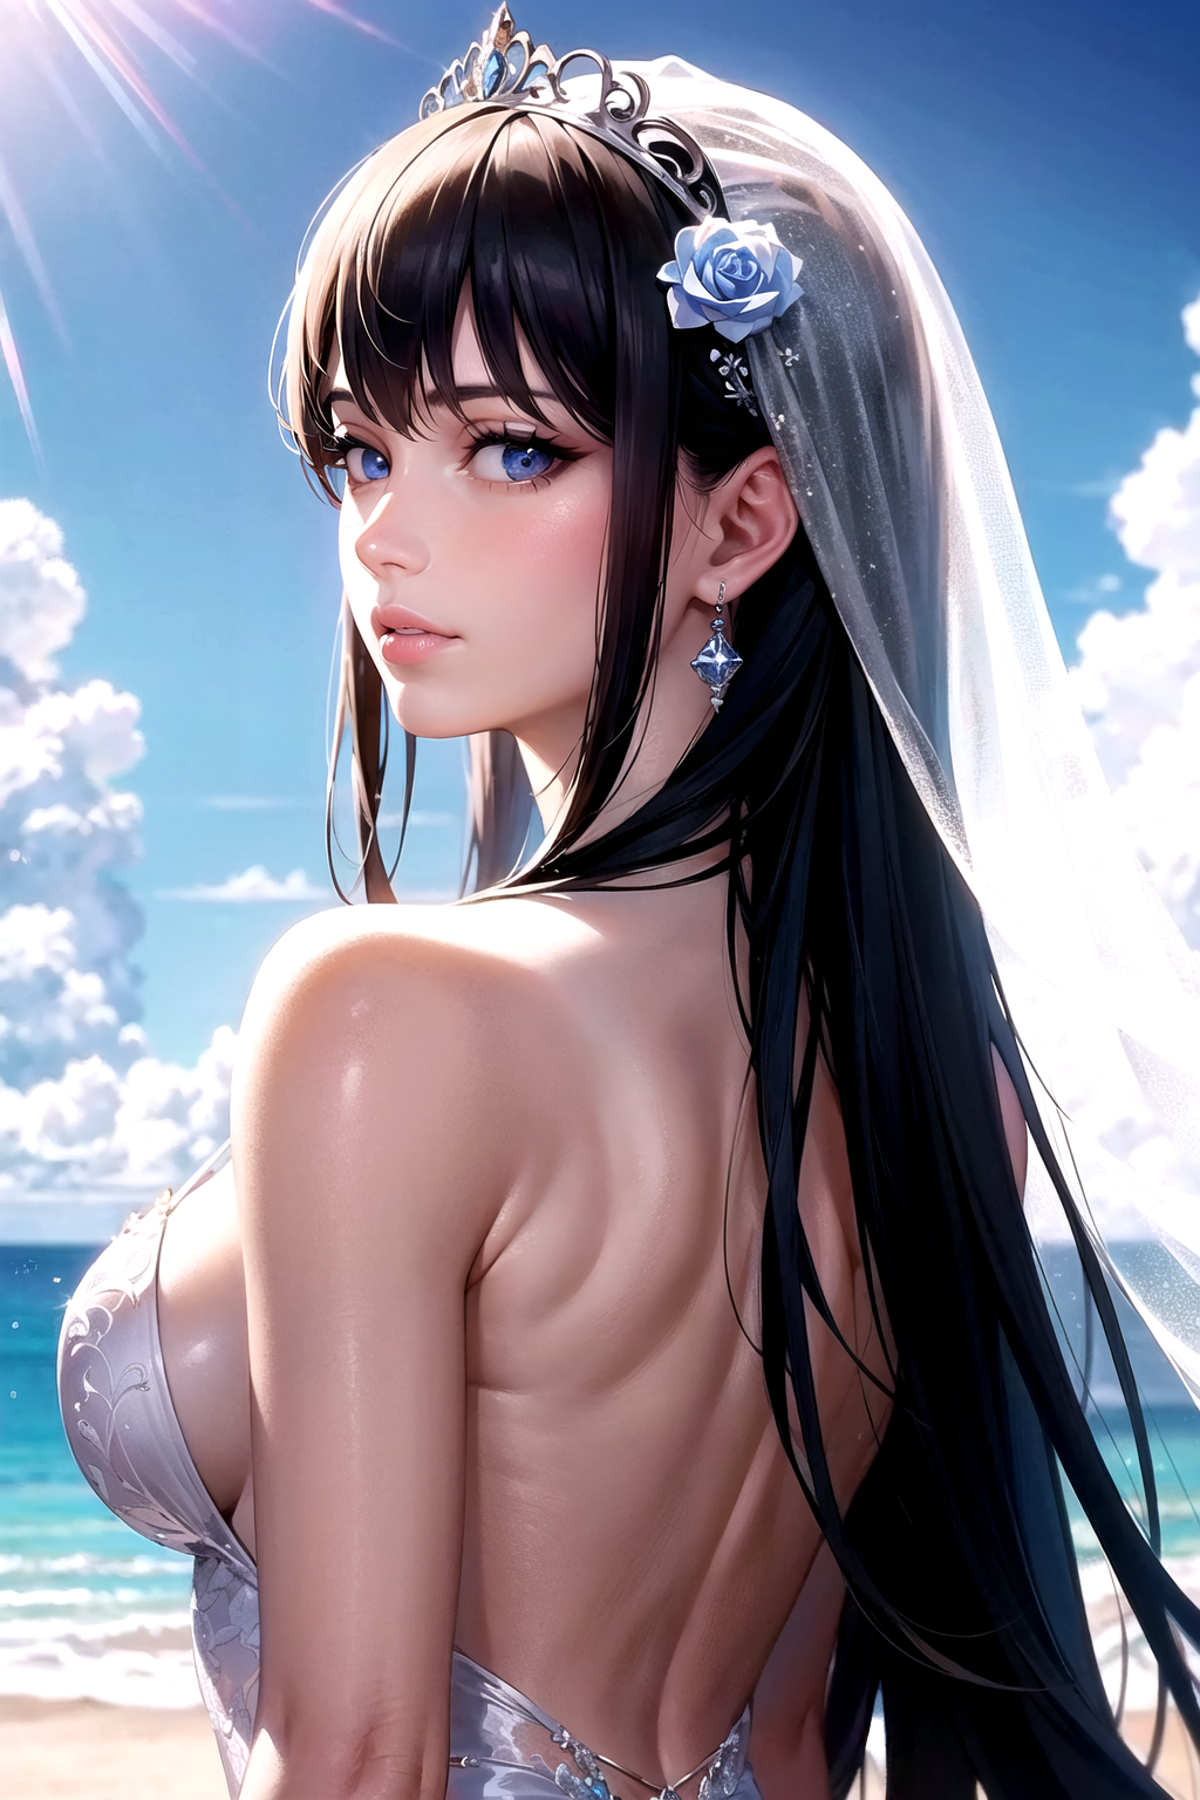 Anime character with long hair wearing a white veil.